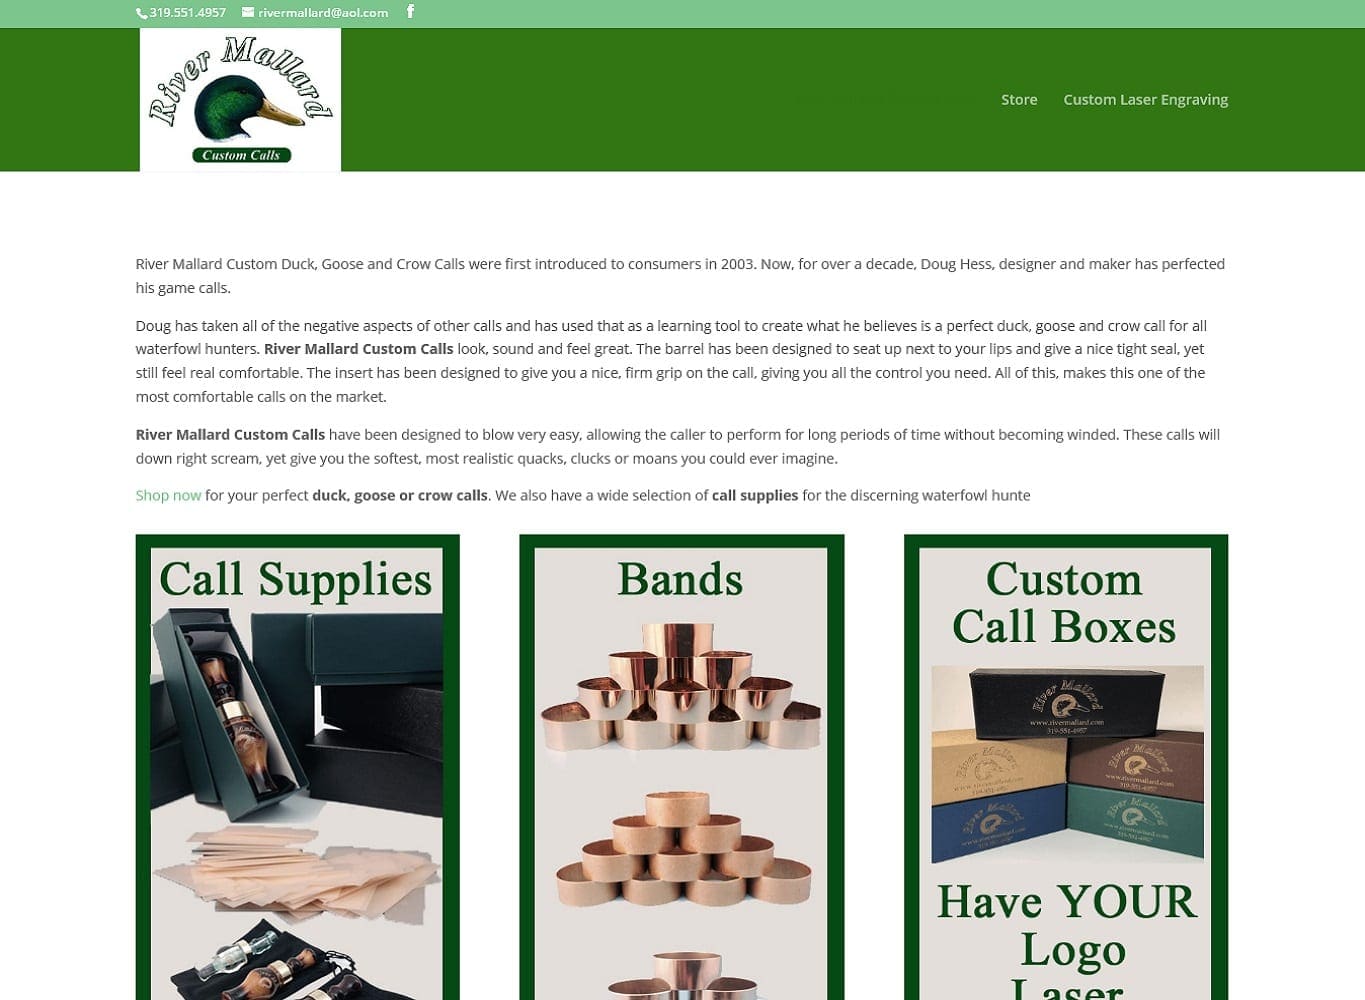 Dive into the world of duck call mastery as Shield Bar Marketing updates River Mallard's website, enabling direct-to-consumer sales and crafting a captivating landing page for Doug Hess, the maker behind the branded duck calls of Duck Dynasty fame.